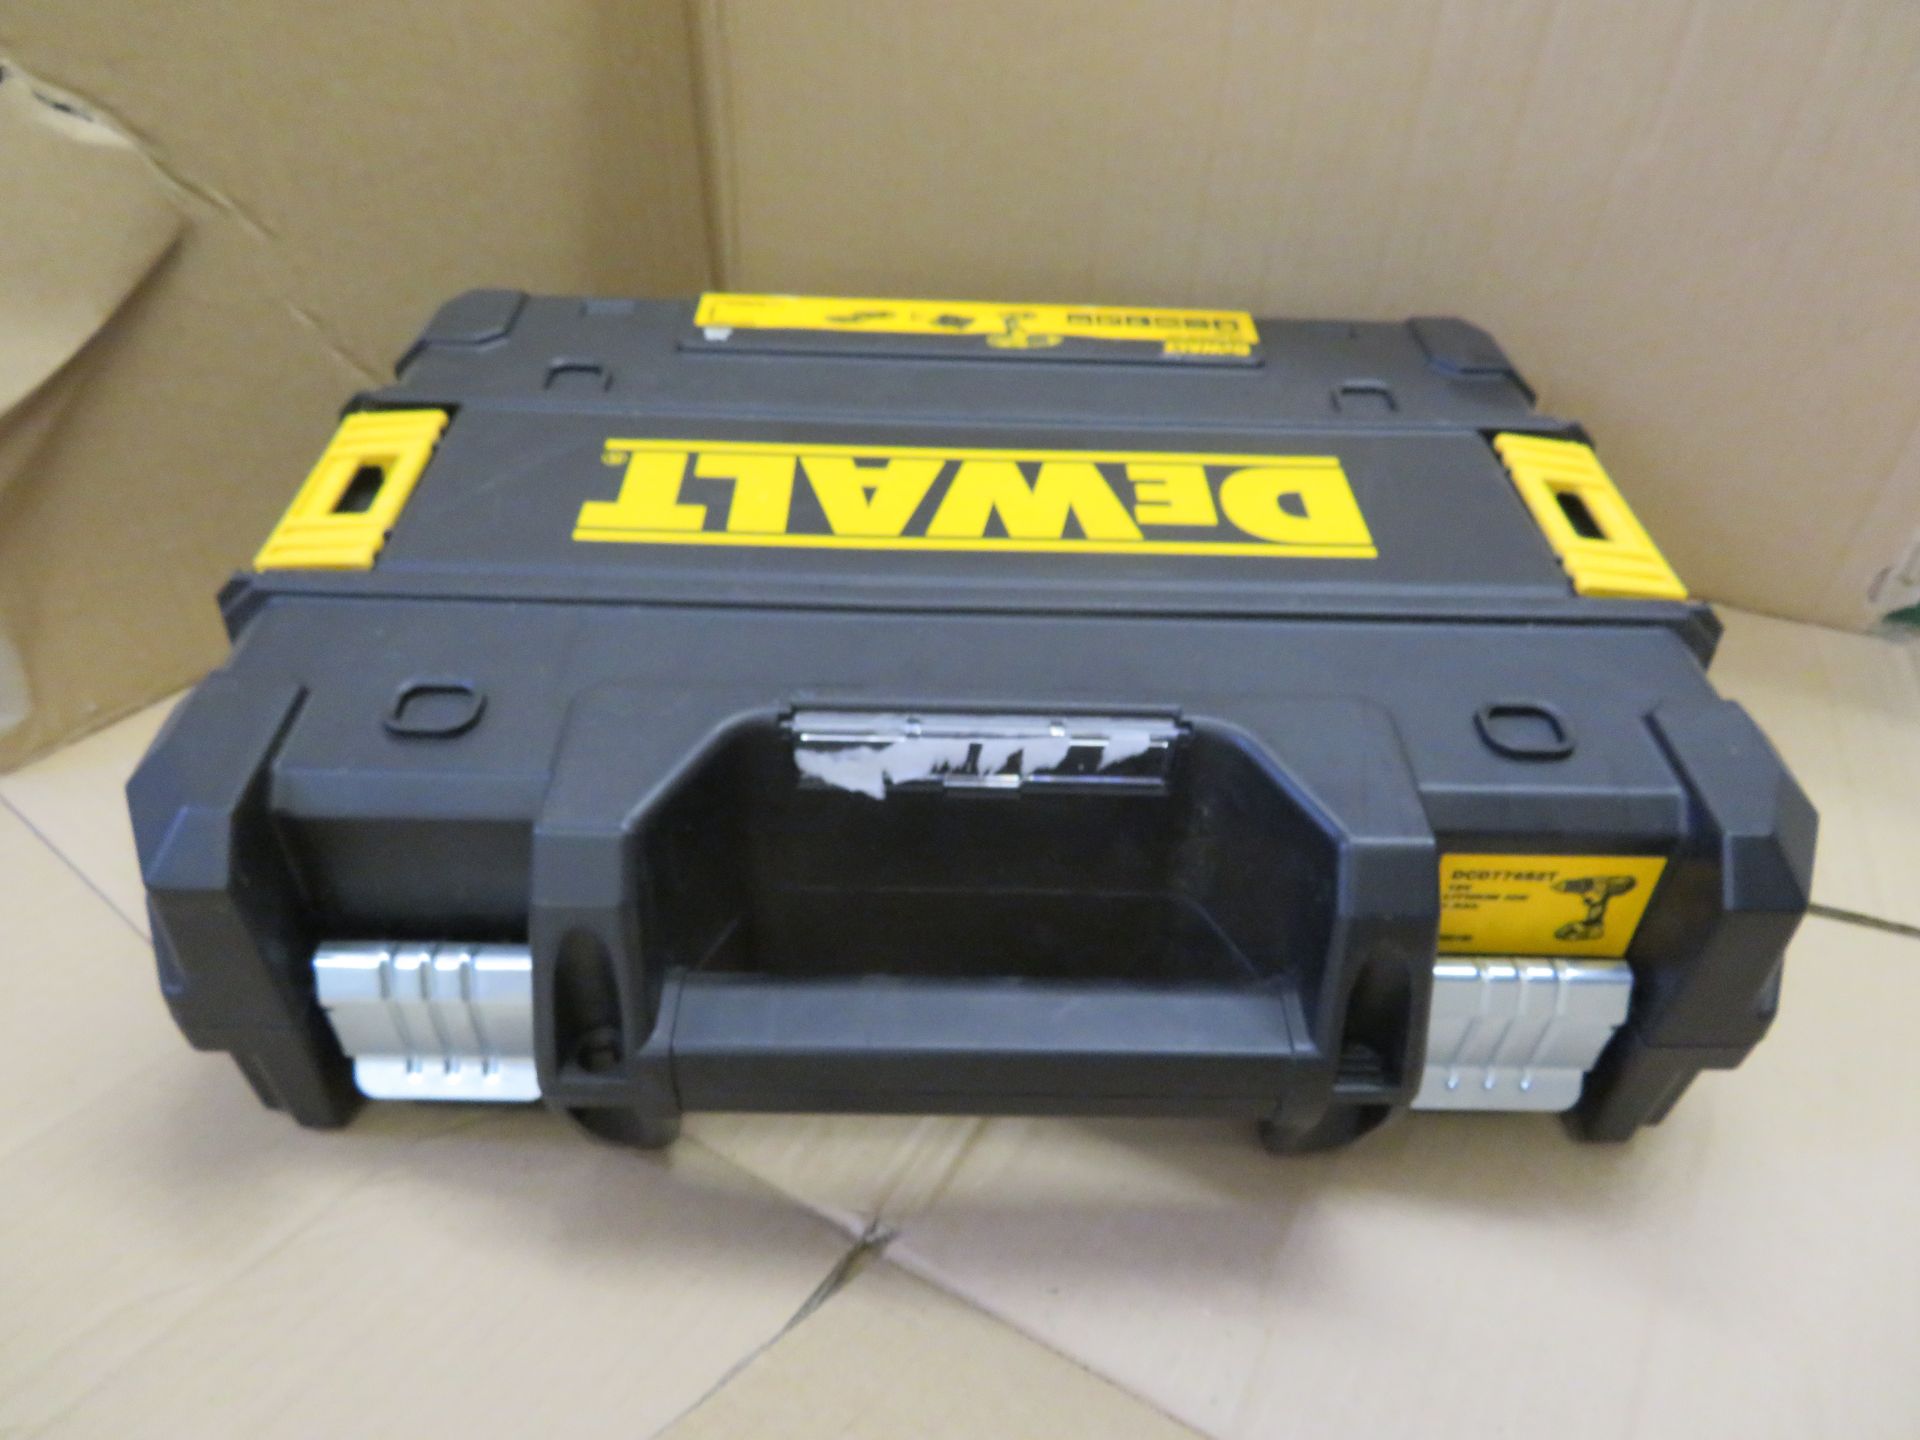 (A1) Dewalt Dcd776S2T-Gb 18V 1.5Ah Li-Ion Xr Cordless Combi Drill - Complete With 2 Batteries - Image 3 of 3